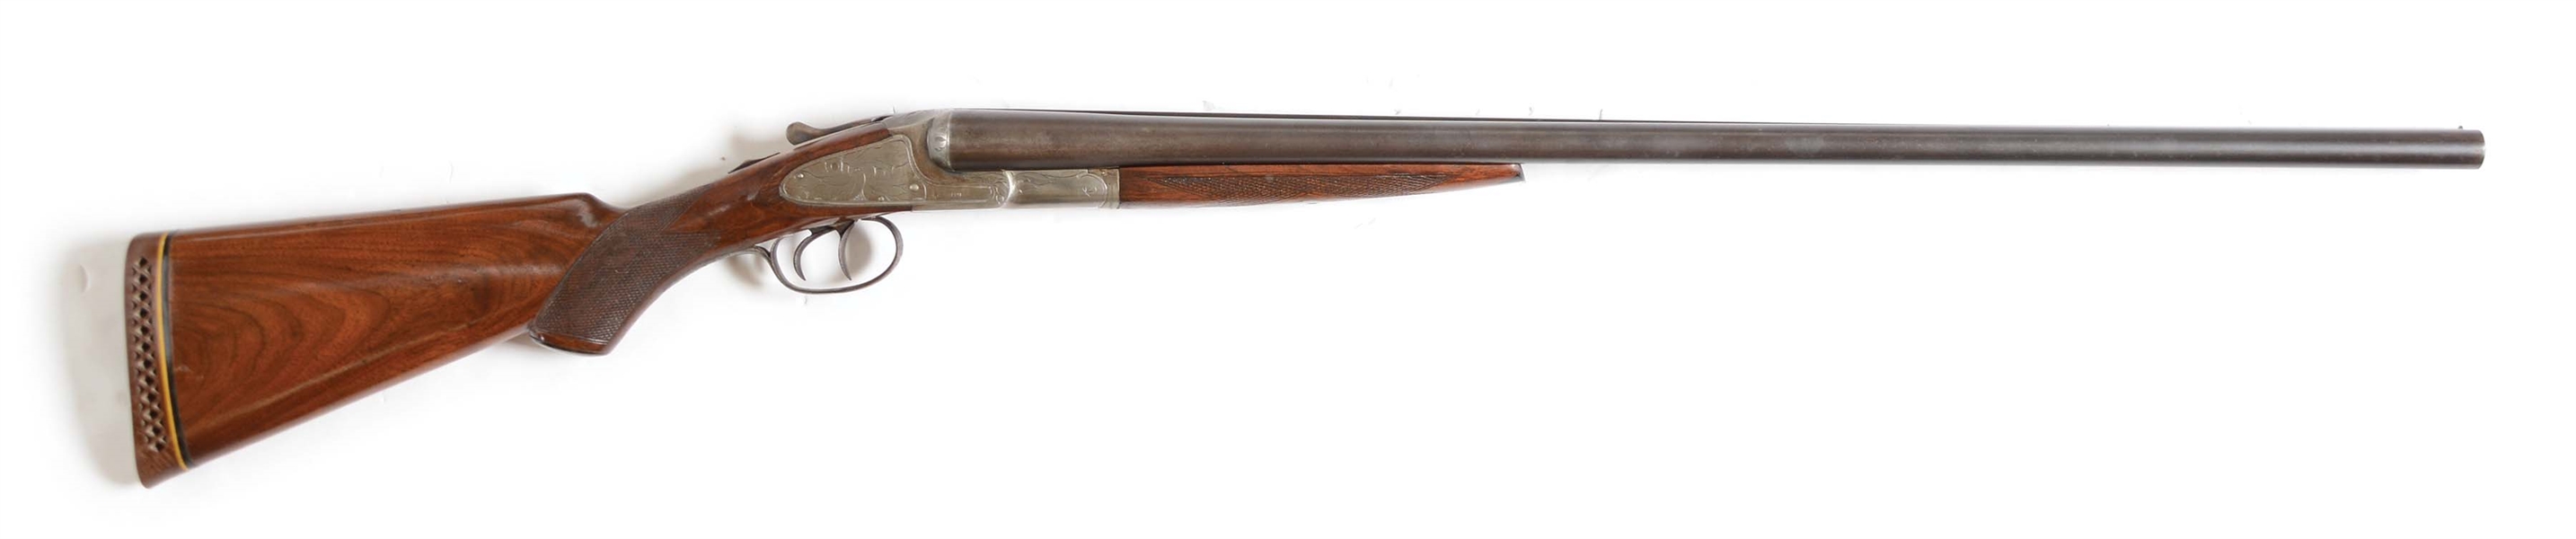 (C) L.C. SMITH IDEAL GRADE SIDE BY SIDE SHOTGUN IN 12 BORE.